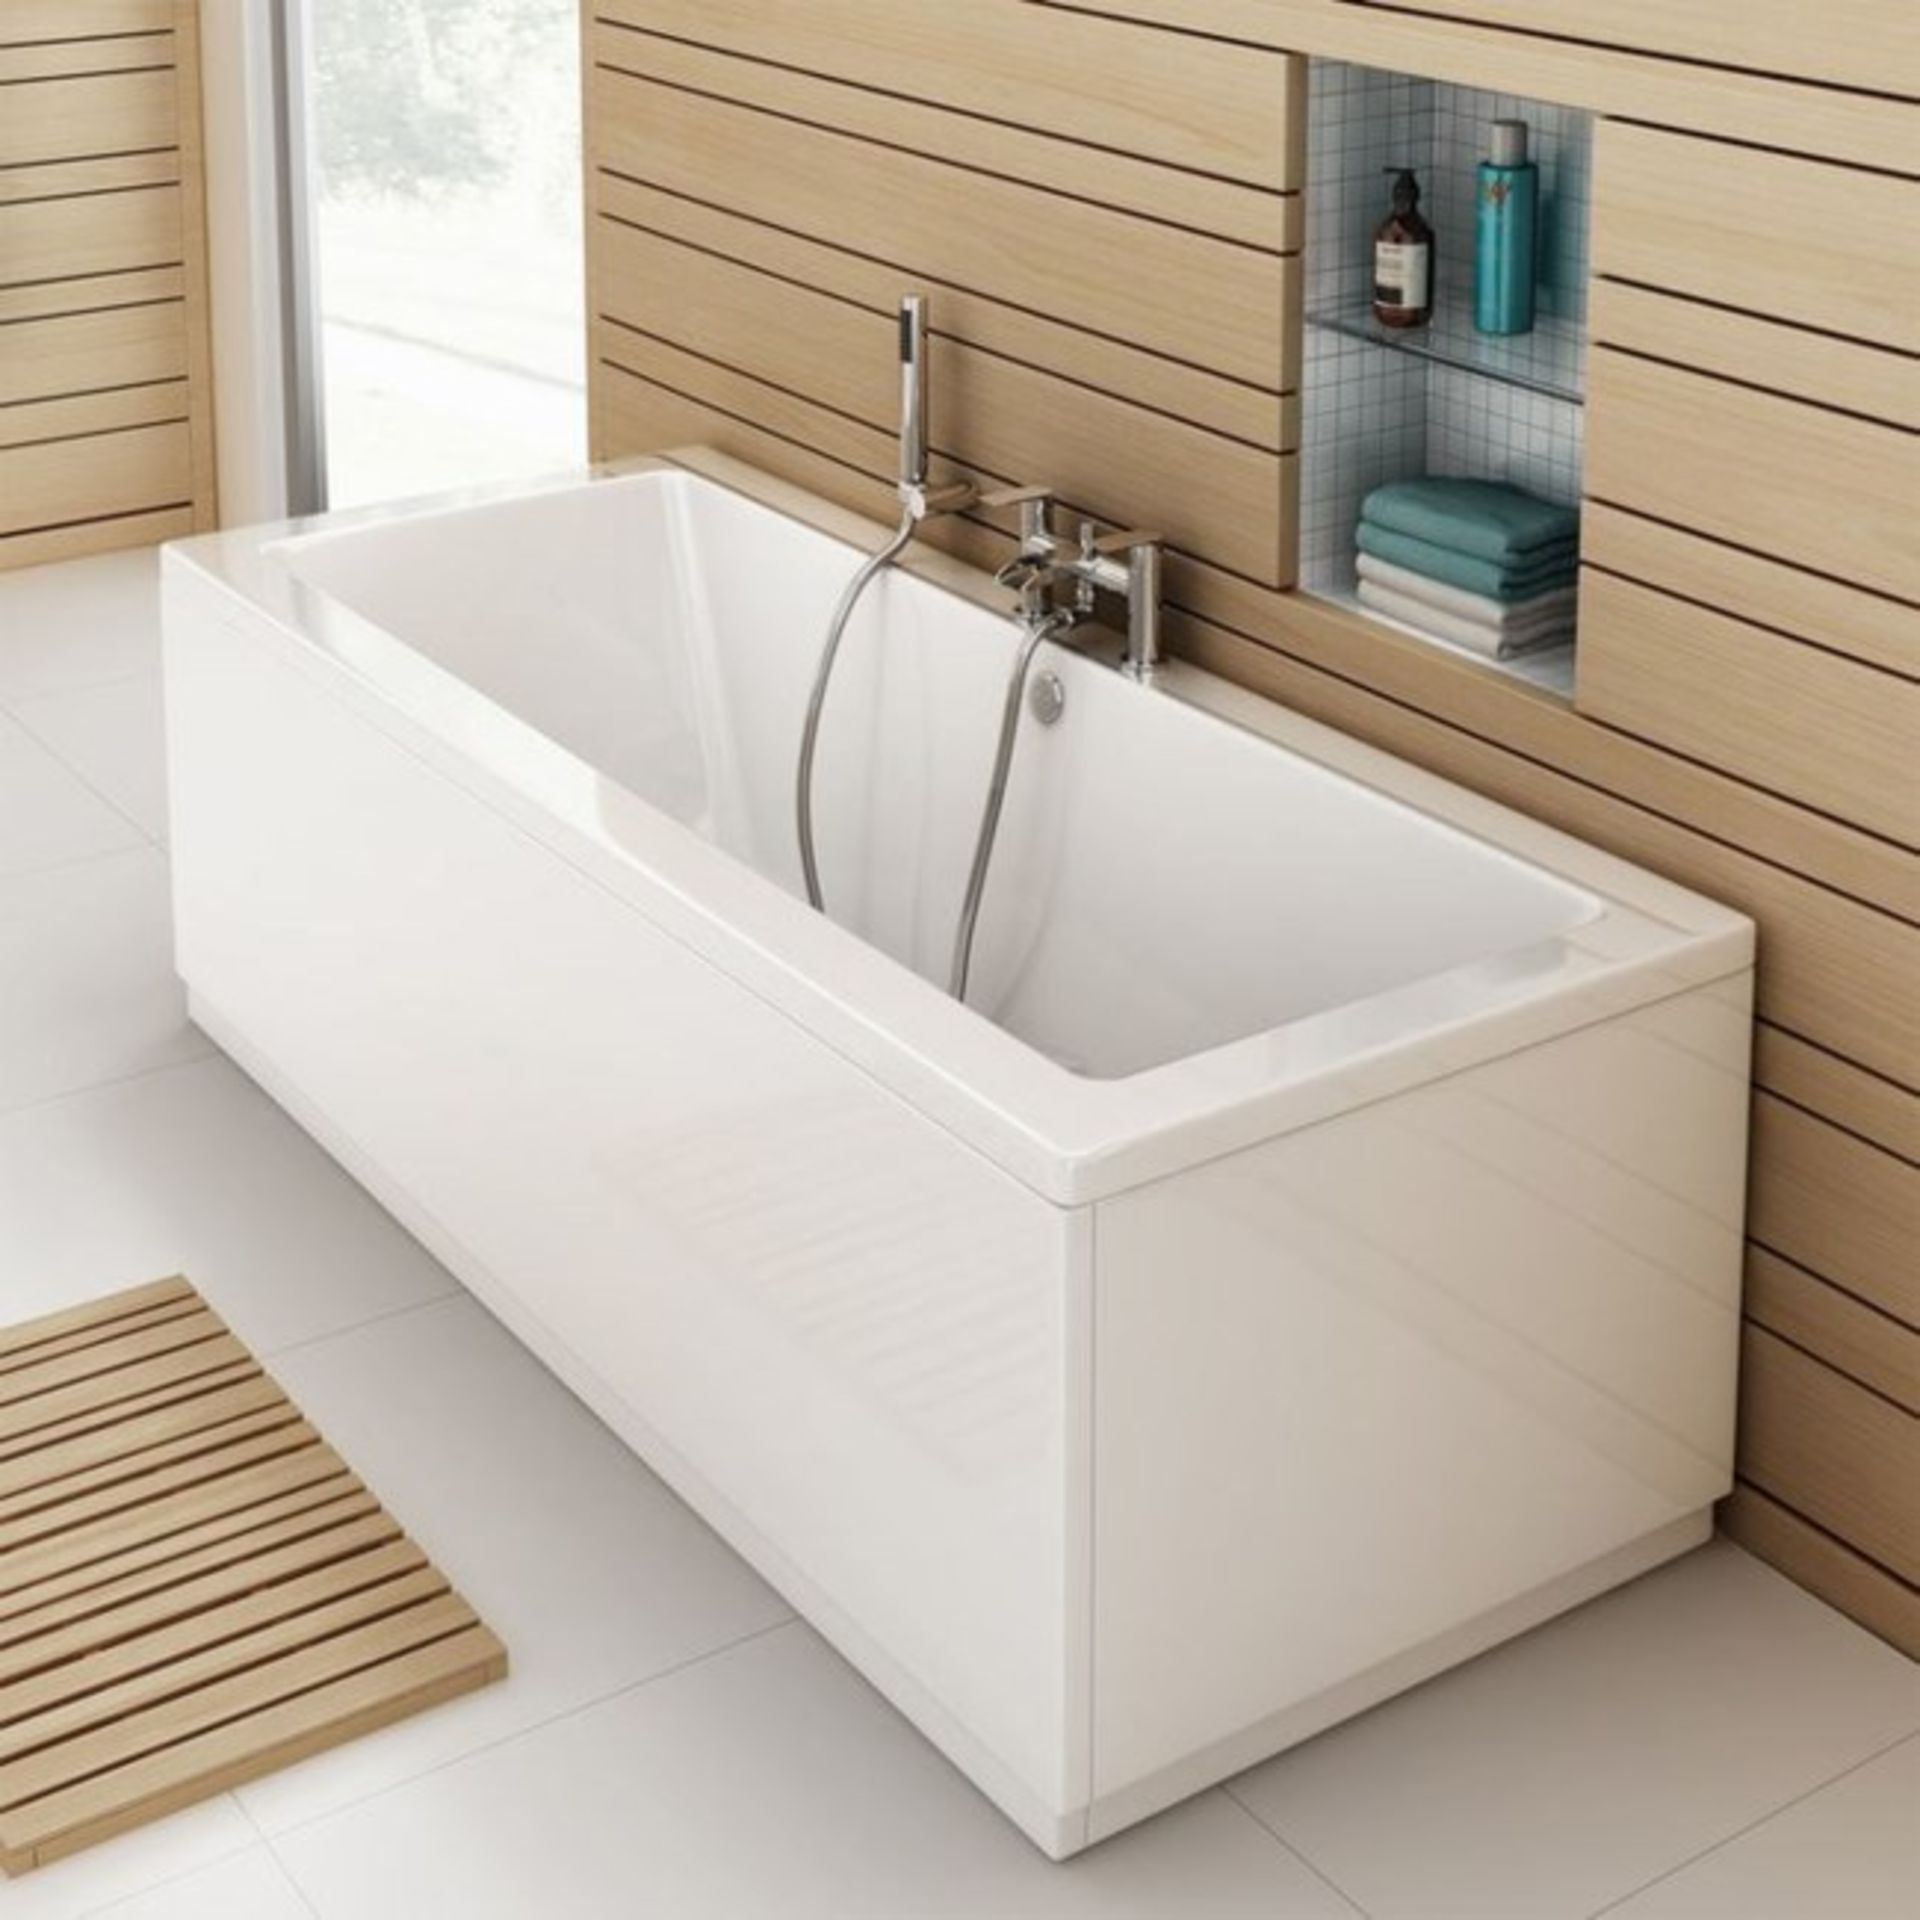 New (Aa5) 1700x700mm Square Double Ended Bath. We Love This Bath Because It Is Perfect For Two...